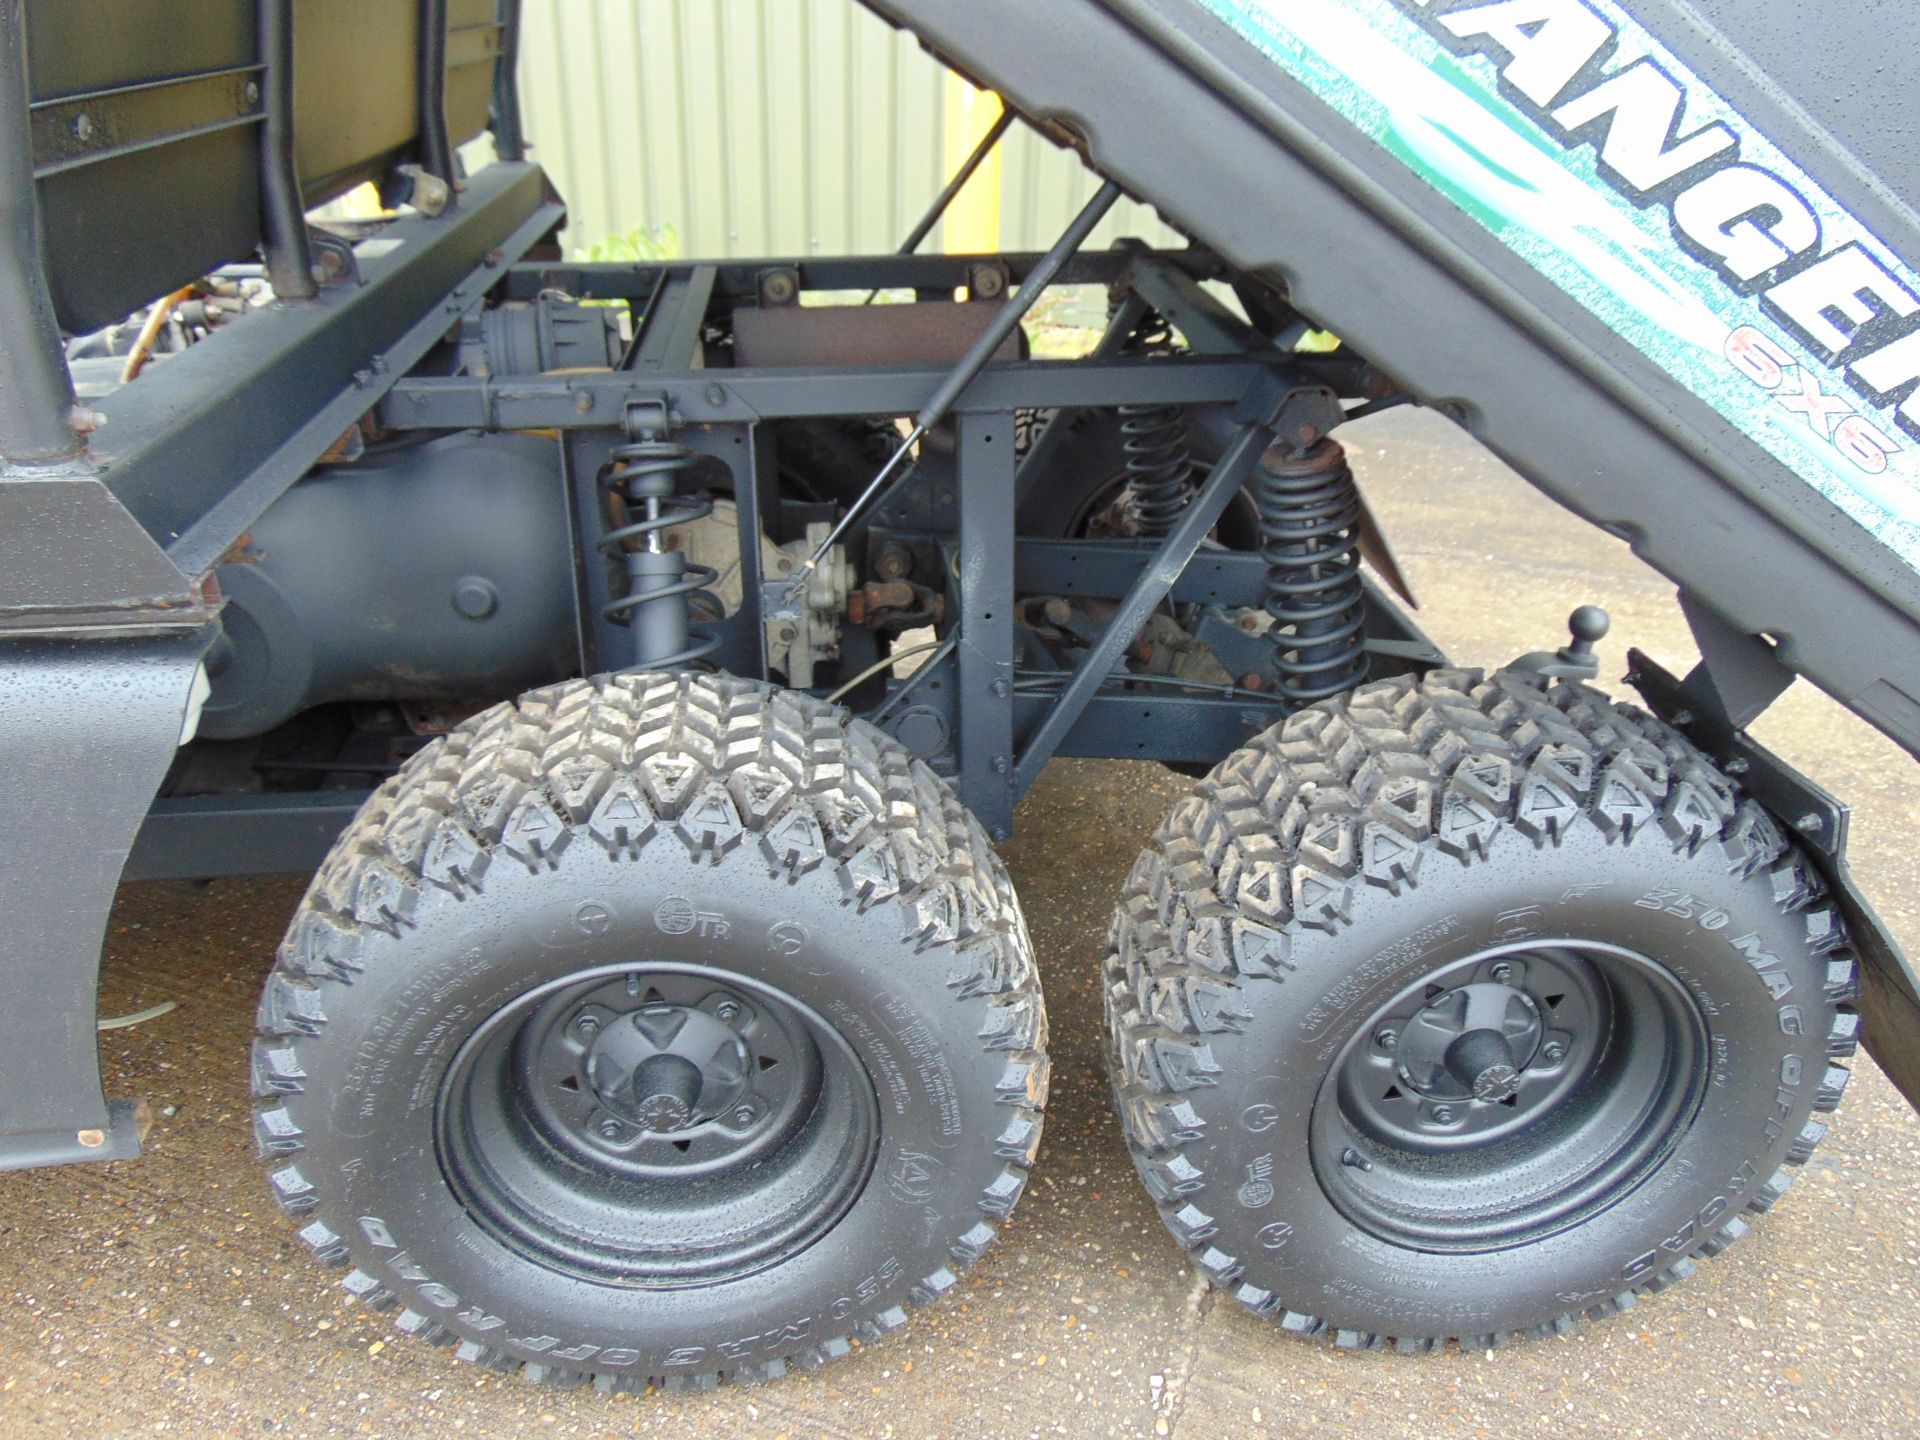 Polaris Ranger 6 x 6 Off-Road Utility Vehicle - Petrol Engine 555 hours Rec from Nat Grid - Image 20 of 30